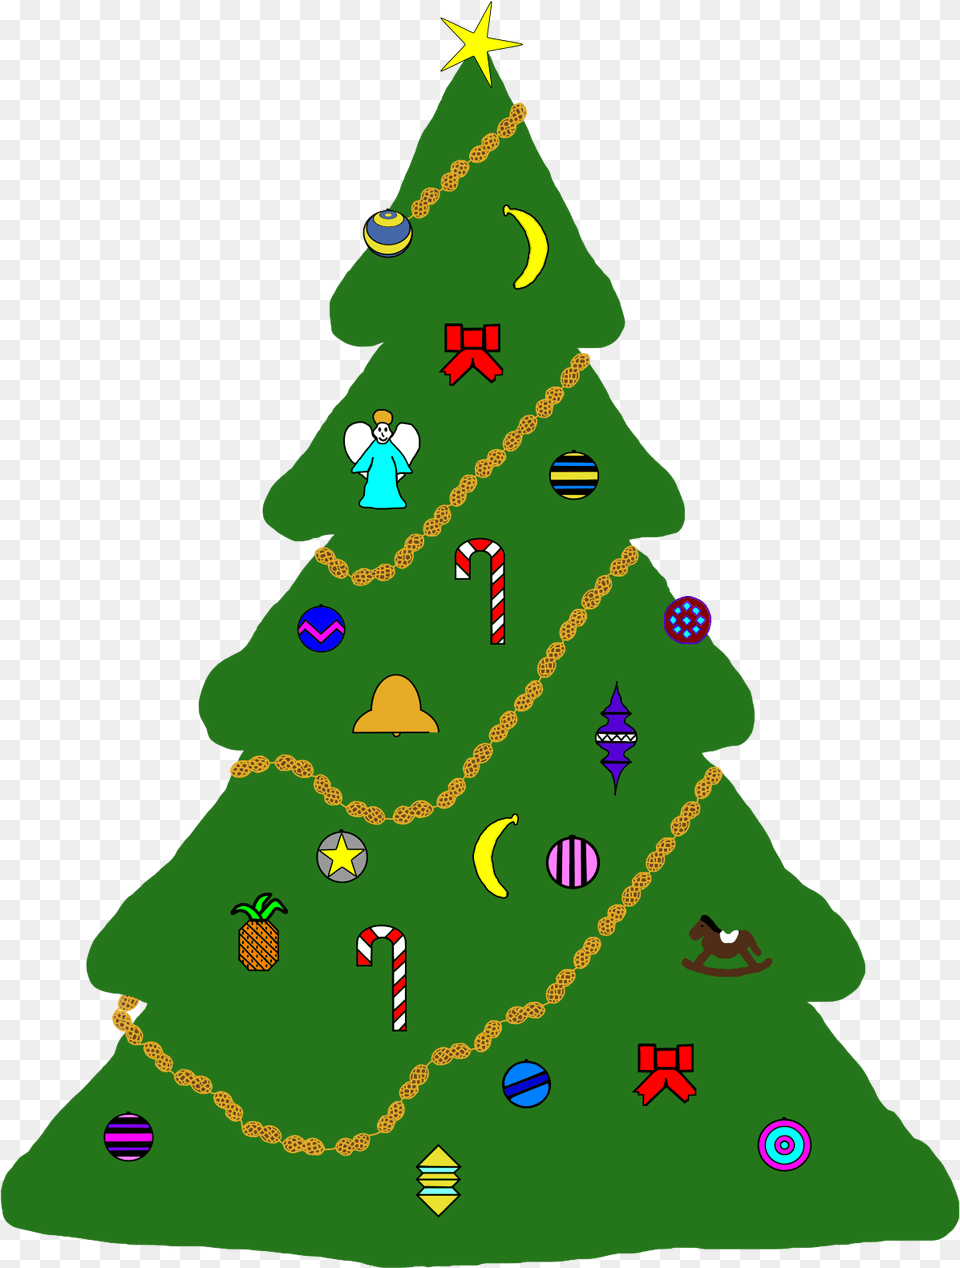 Christmas Tree For Monkeys Clip Arts Christmas Tree, Plant, Christmas Decorations, Festival, Baby Png